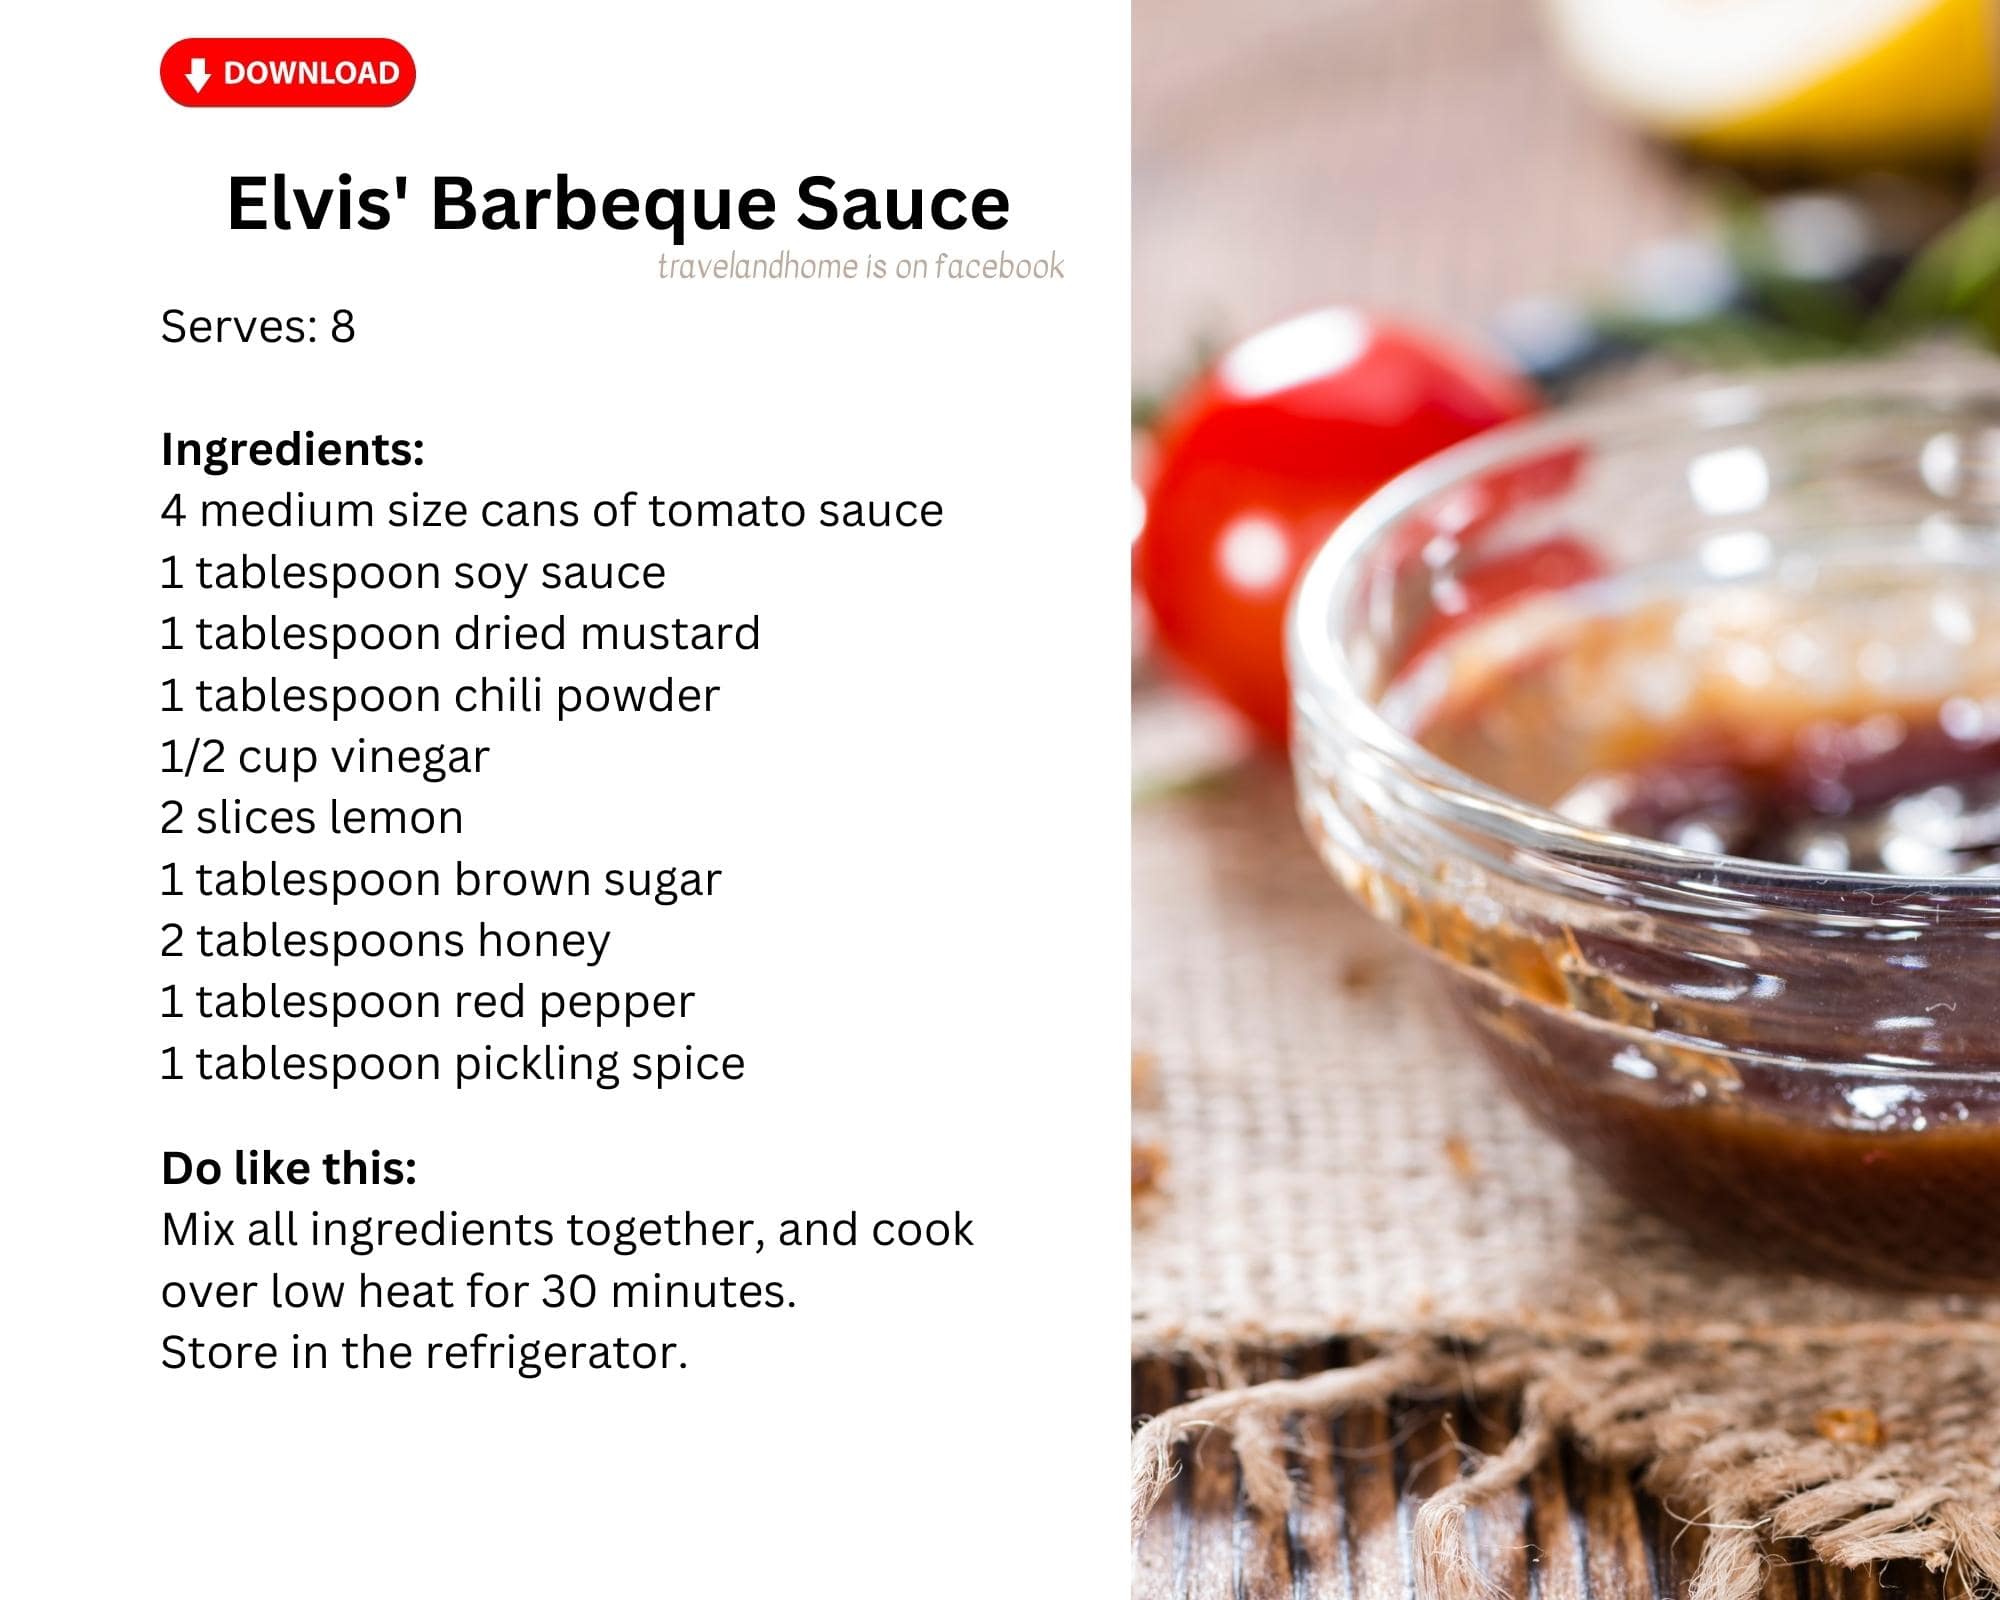 Quick and easy recipe for one Elvis favorite food bbq sauce barbeque sauce recipe min